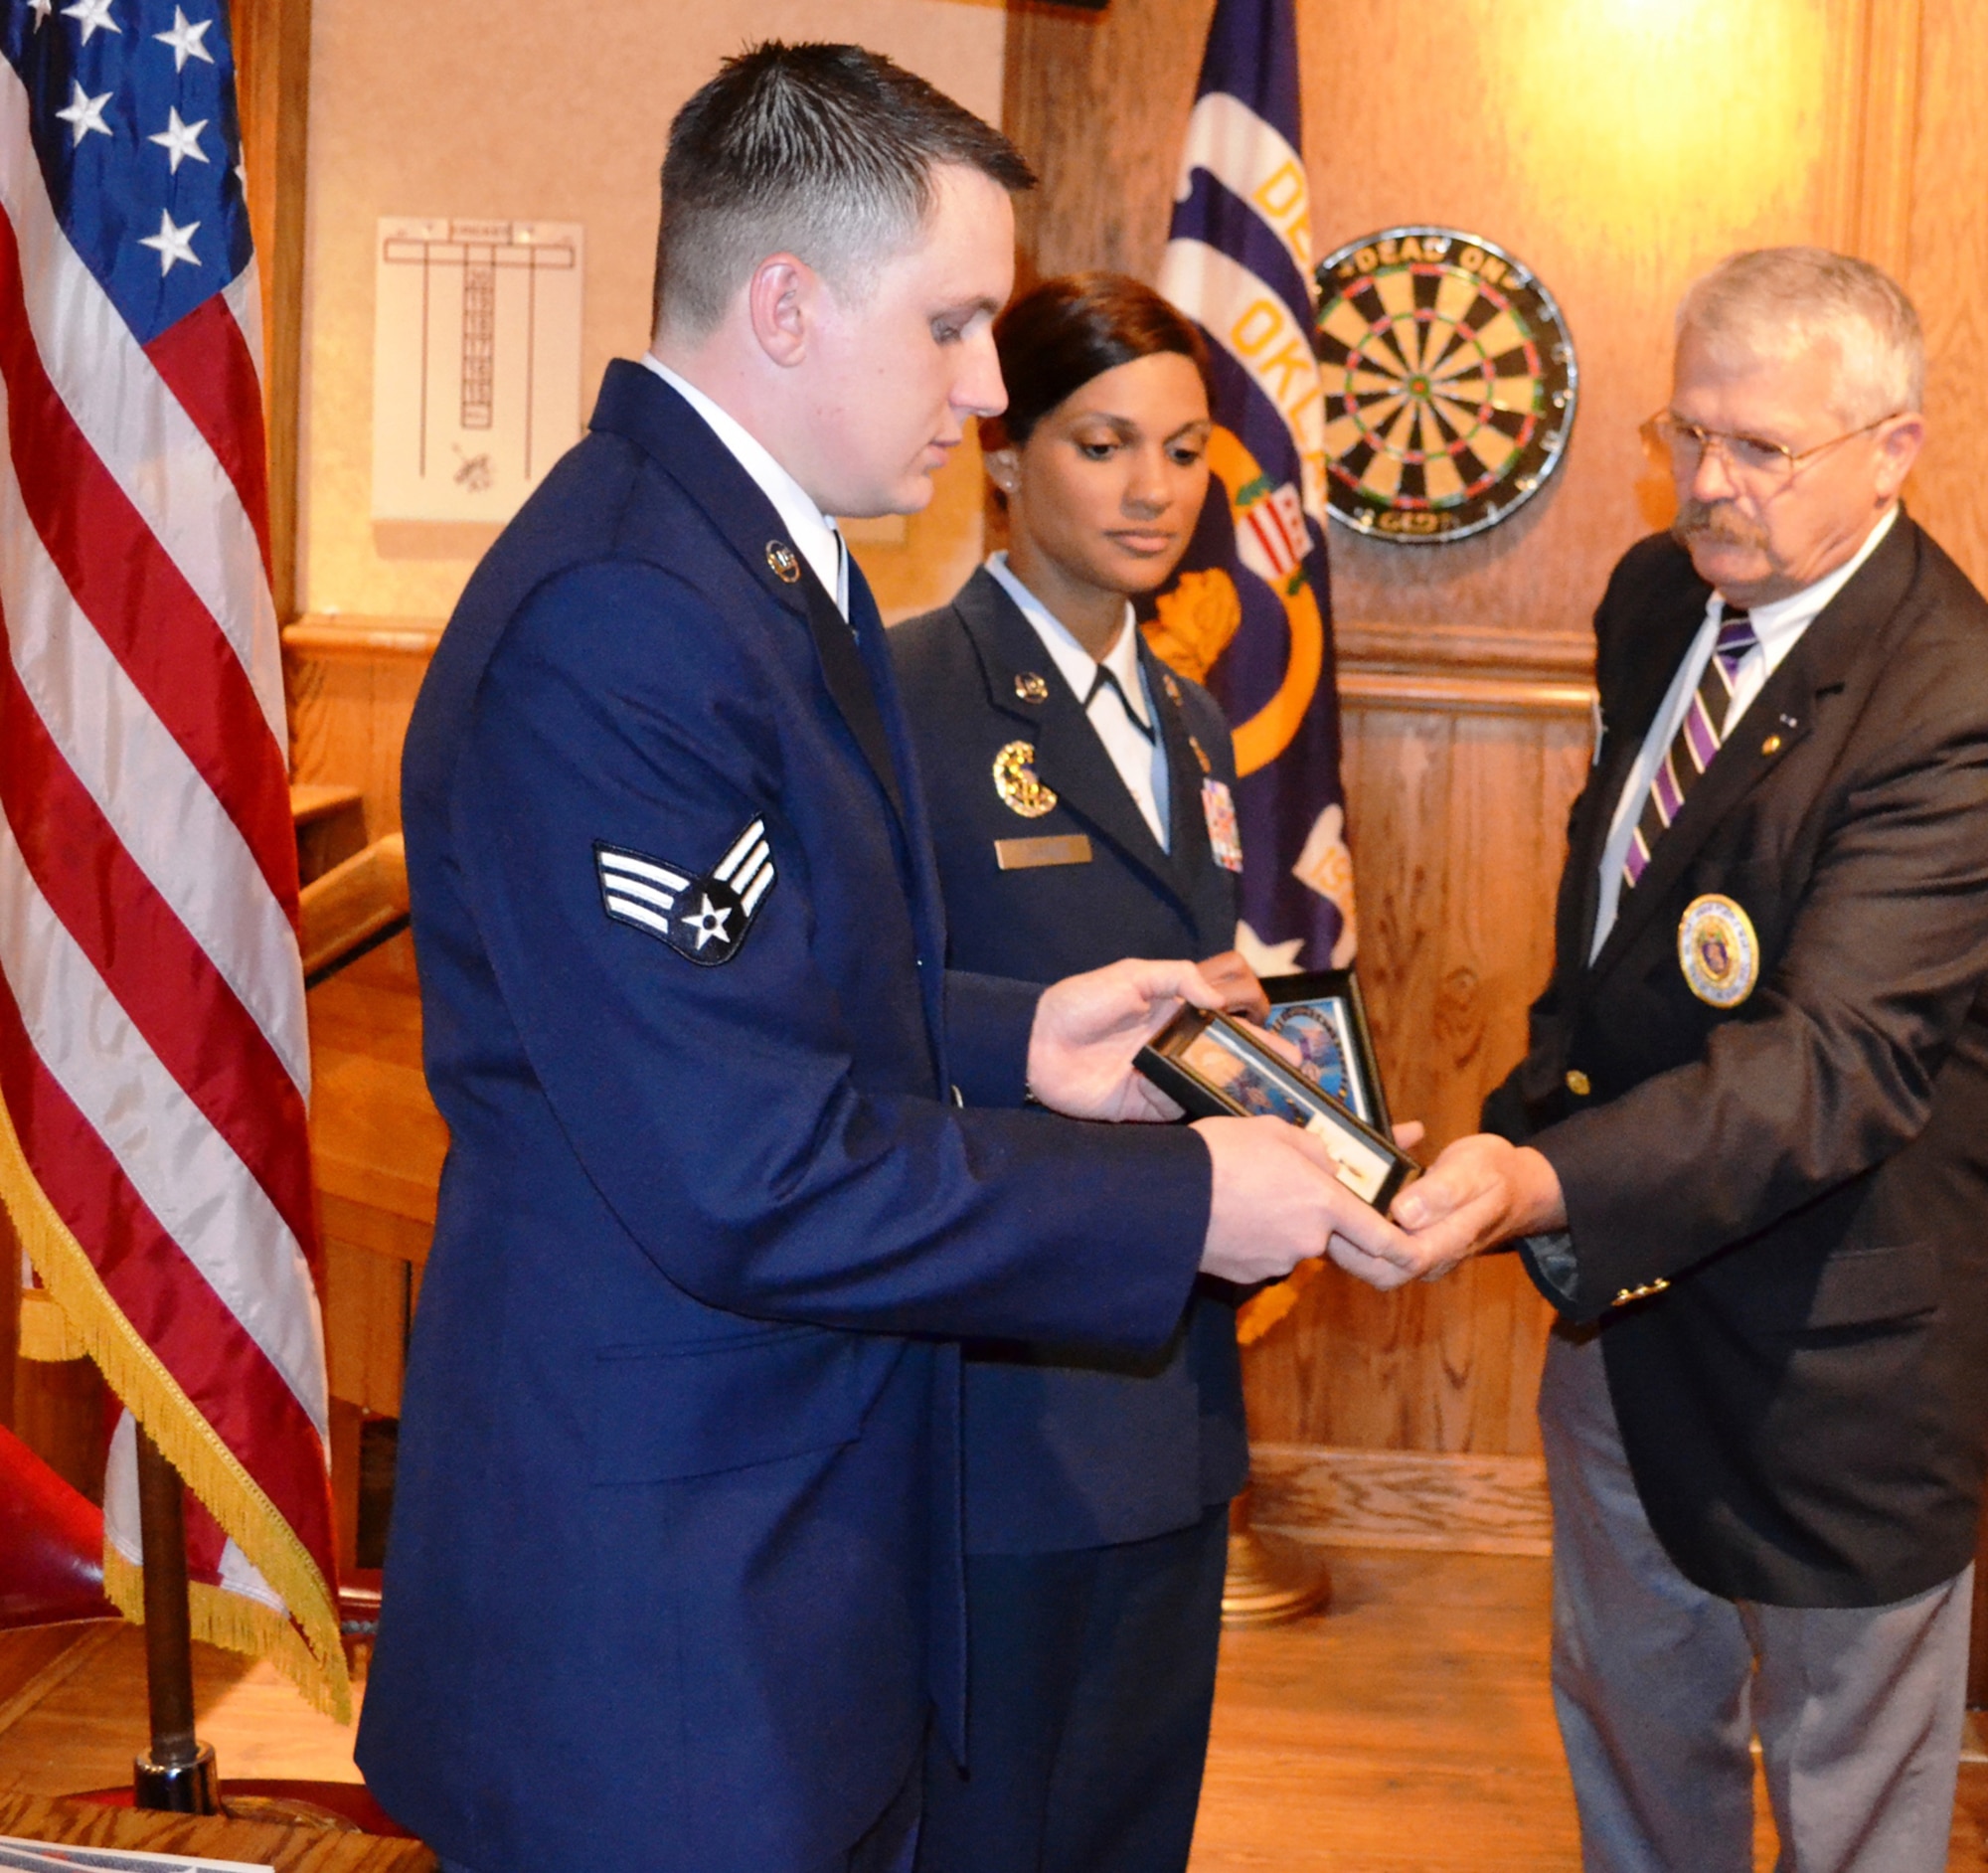 Charles Scott Jr. of the 568th Chapter of the Military Order of the Purple Heart presents induction certificates to Senior Airman Michael Helsdingen, 72nd Security Forces Squadron, and Senior Master Sgt. Melissa Garrett, 960th Airborne Air Control Squadron. They were two of five Team Tinker members honored by the chapter during the May 19 ceremony. (Air Force photo by Kathy E. Paine)